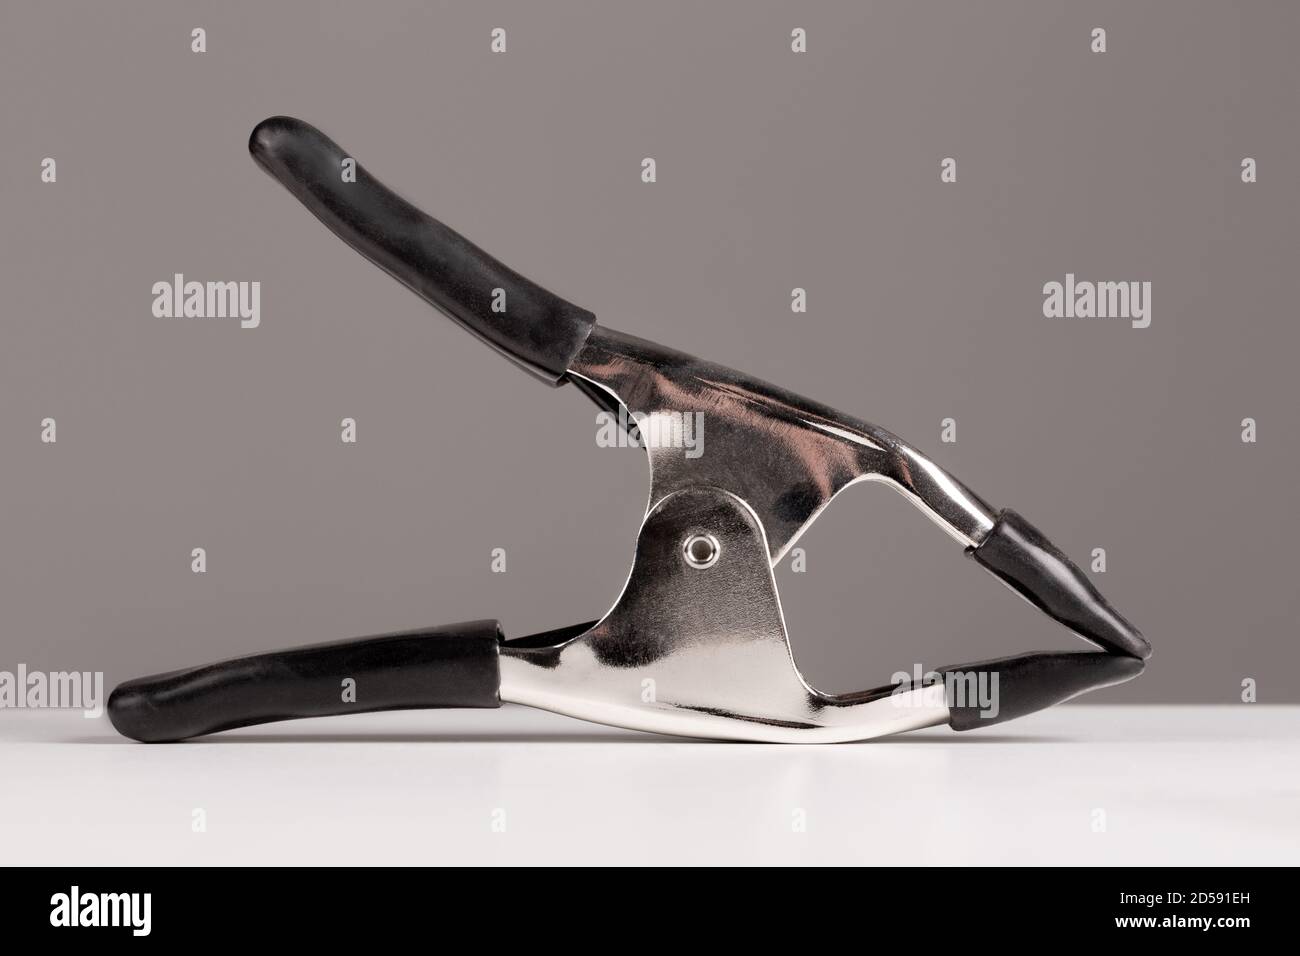 Spring clamp useful for gripping many things, particularly in a photography studio. Stock Photo